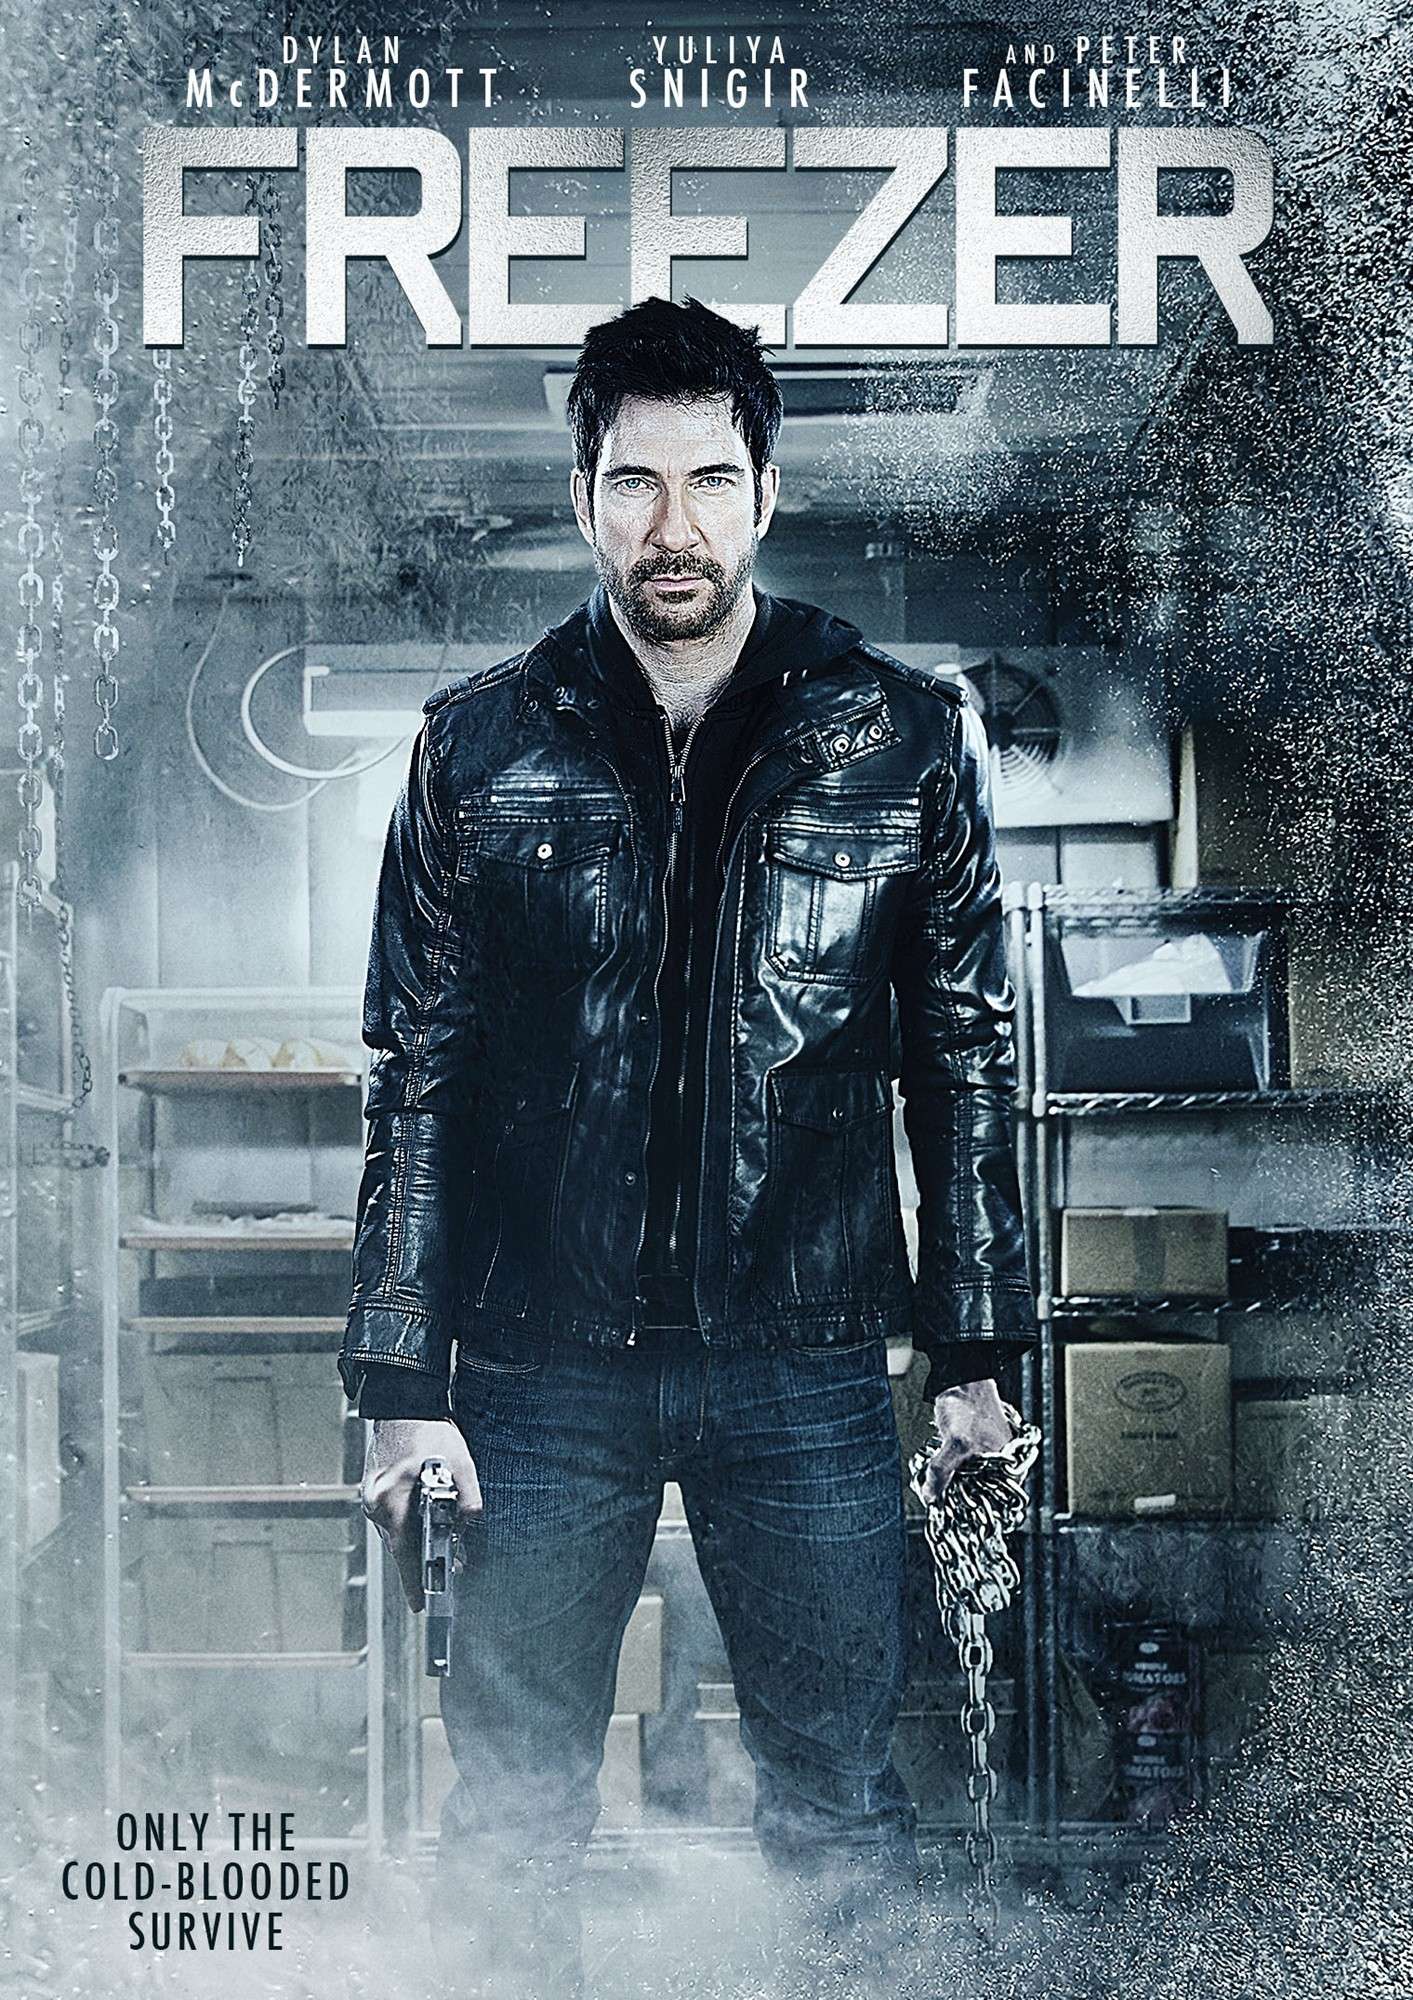 Poster of Anchor Bay Films' Freezer (2014)